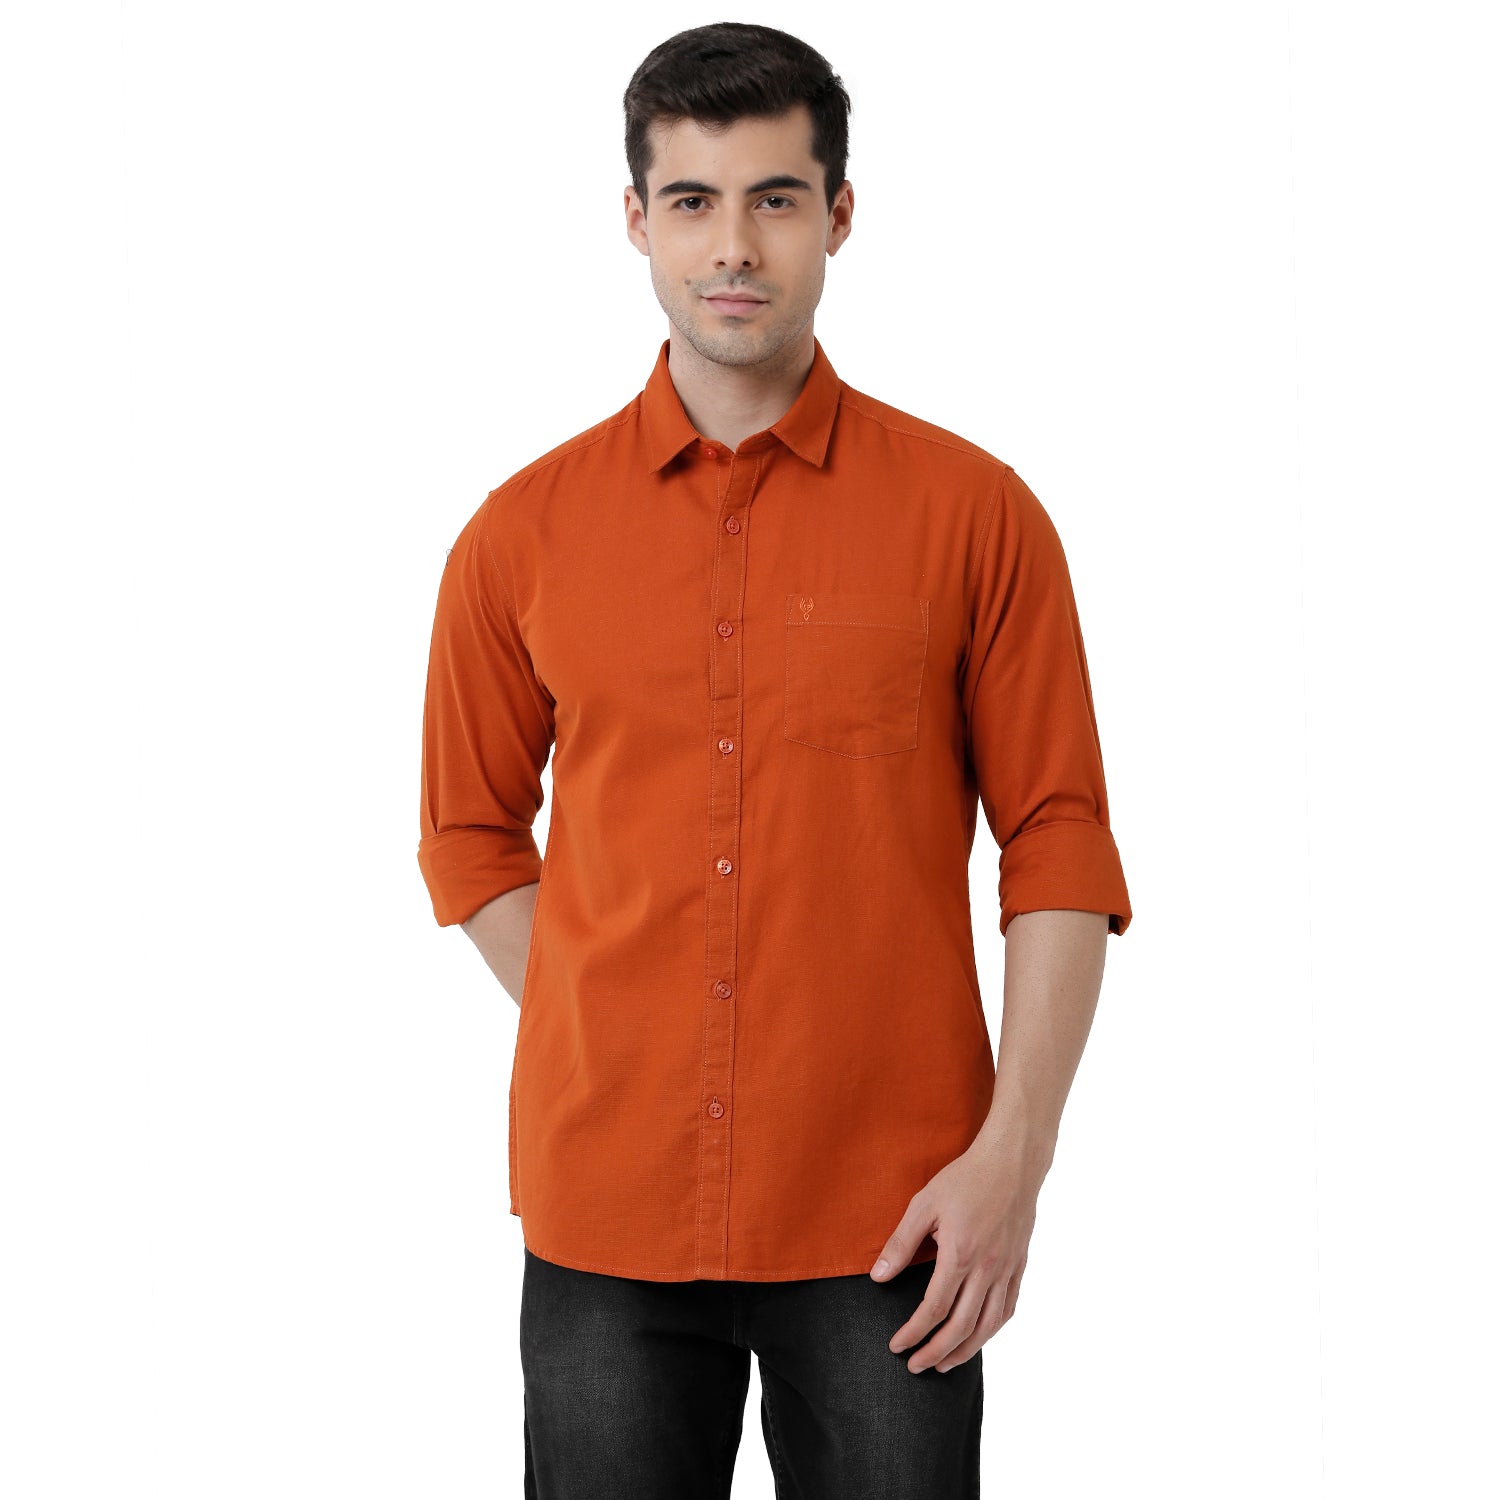 Classic Polo Mens Solid Slim Fit Full Sleeve Orange Color Shirt - SN1-111 C Shirts Classic Polo 